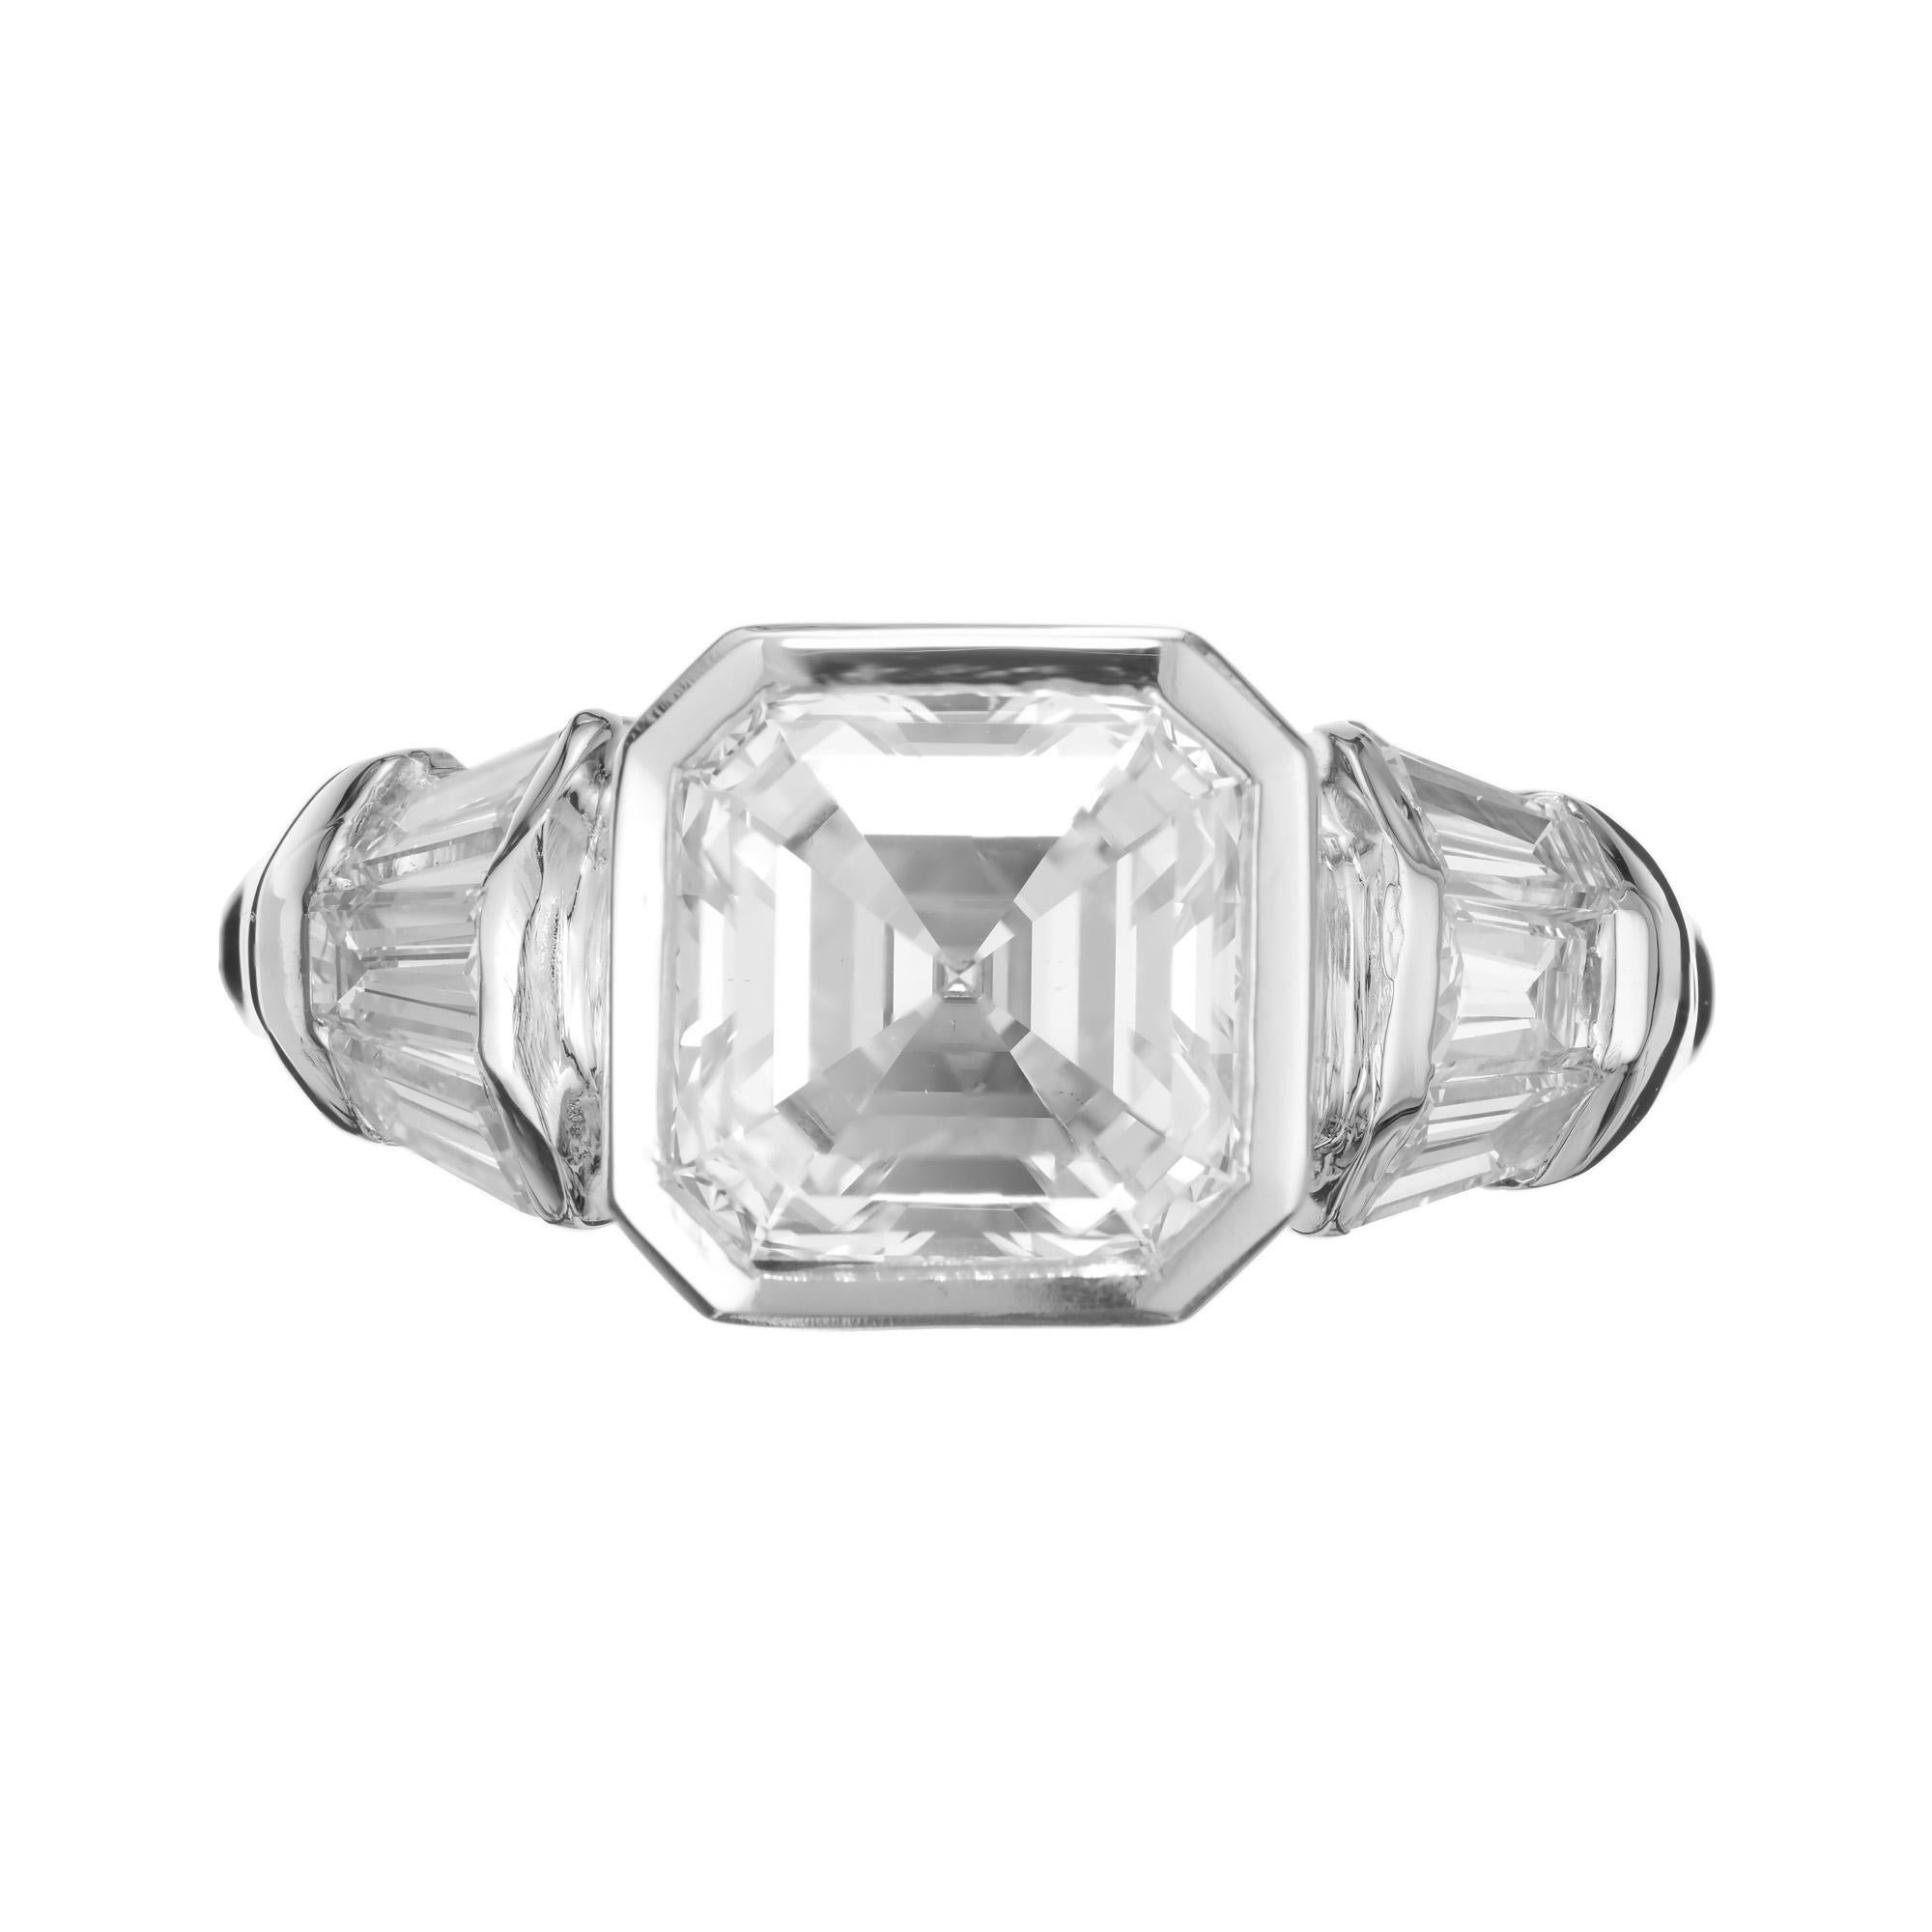 Square cut diamond engagement ring. This GIA certified 2.04 carat square emerald cut center diamond is graded F color, near colorless and bezel set in to a platinum setting, accented with 3 tapered baguette diamonds one each side of the main stone.